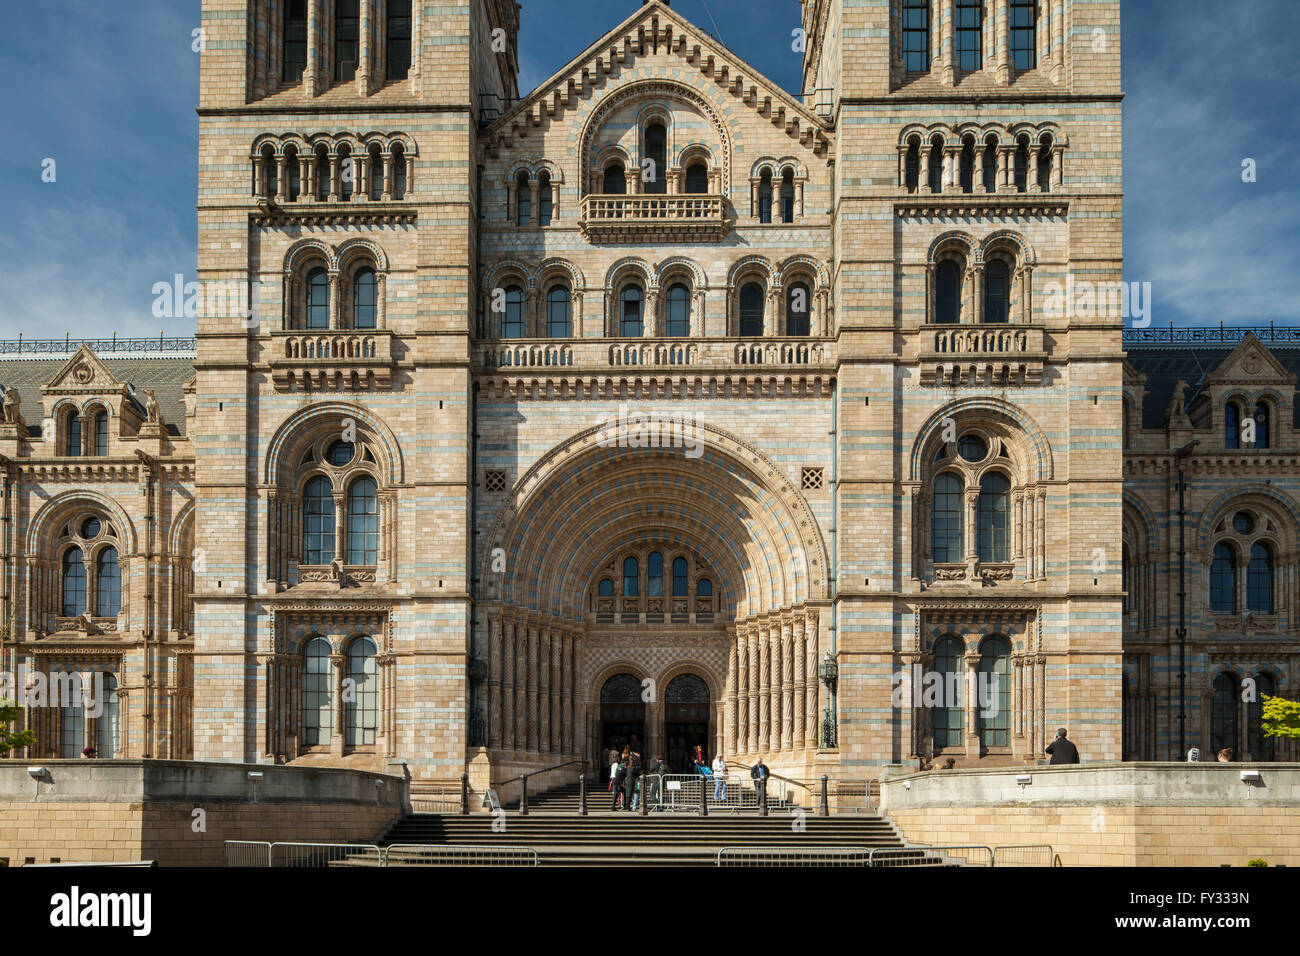 Entrance to Natural History museum in London, England. Stock Photo